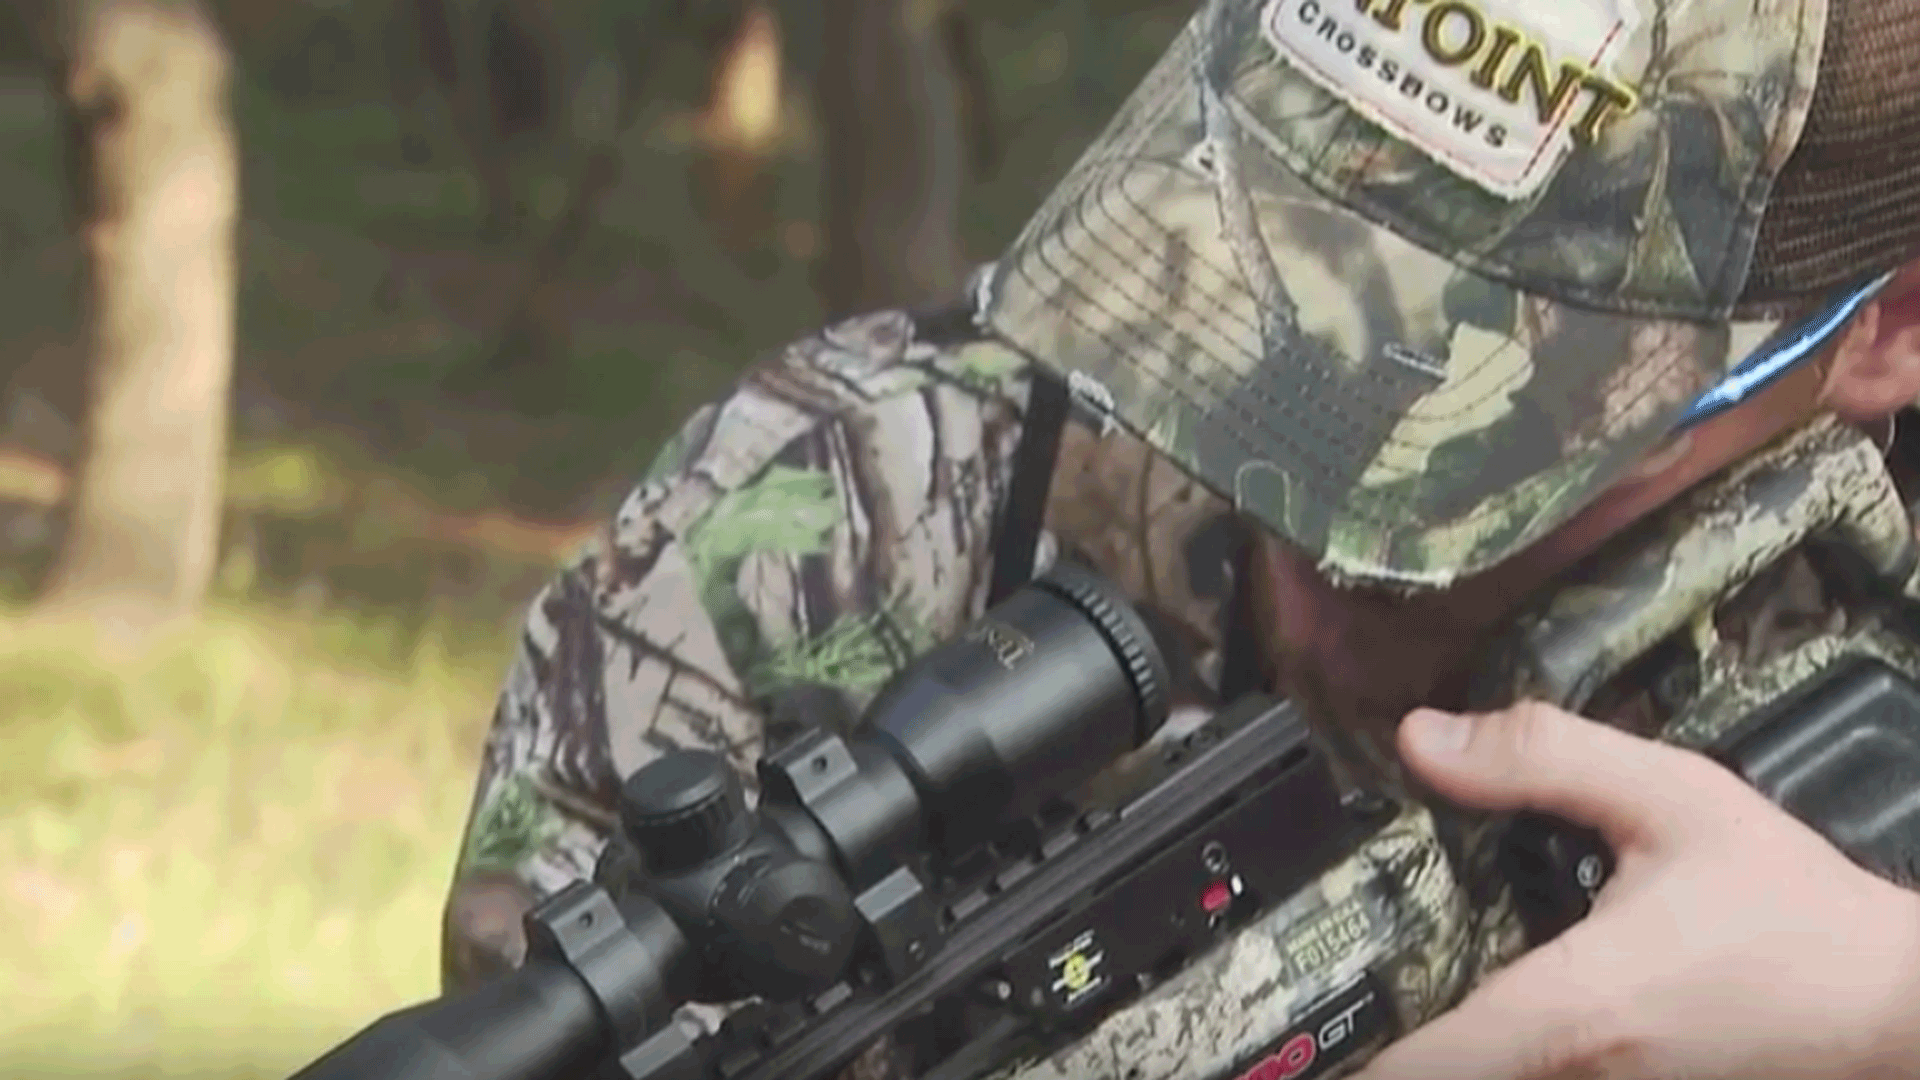 Do’s & Don’ts for Crossbow Safety